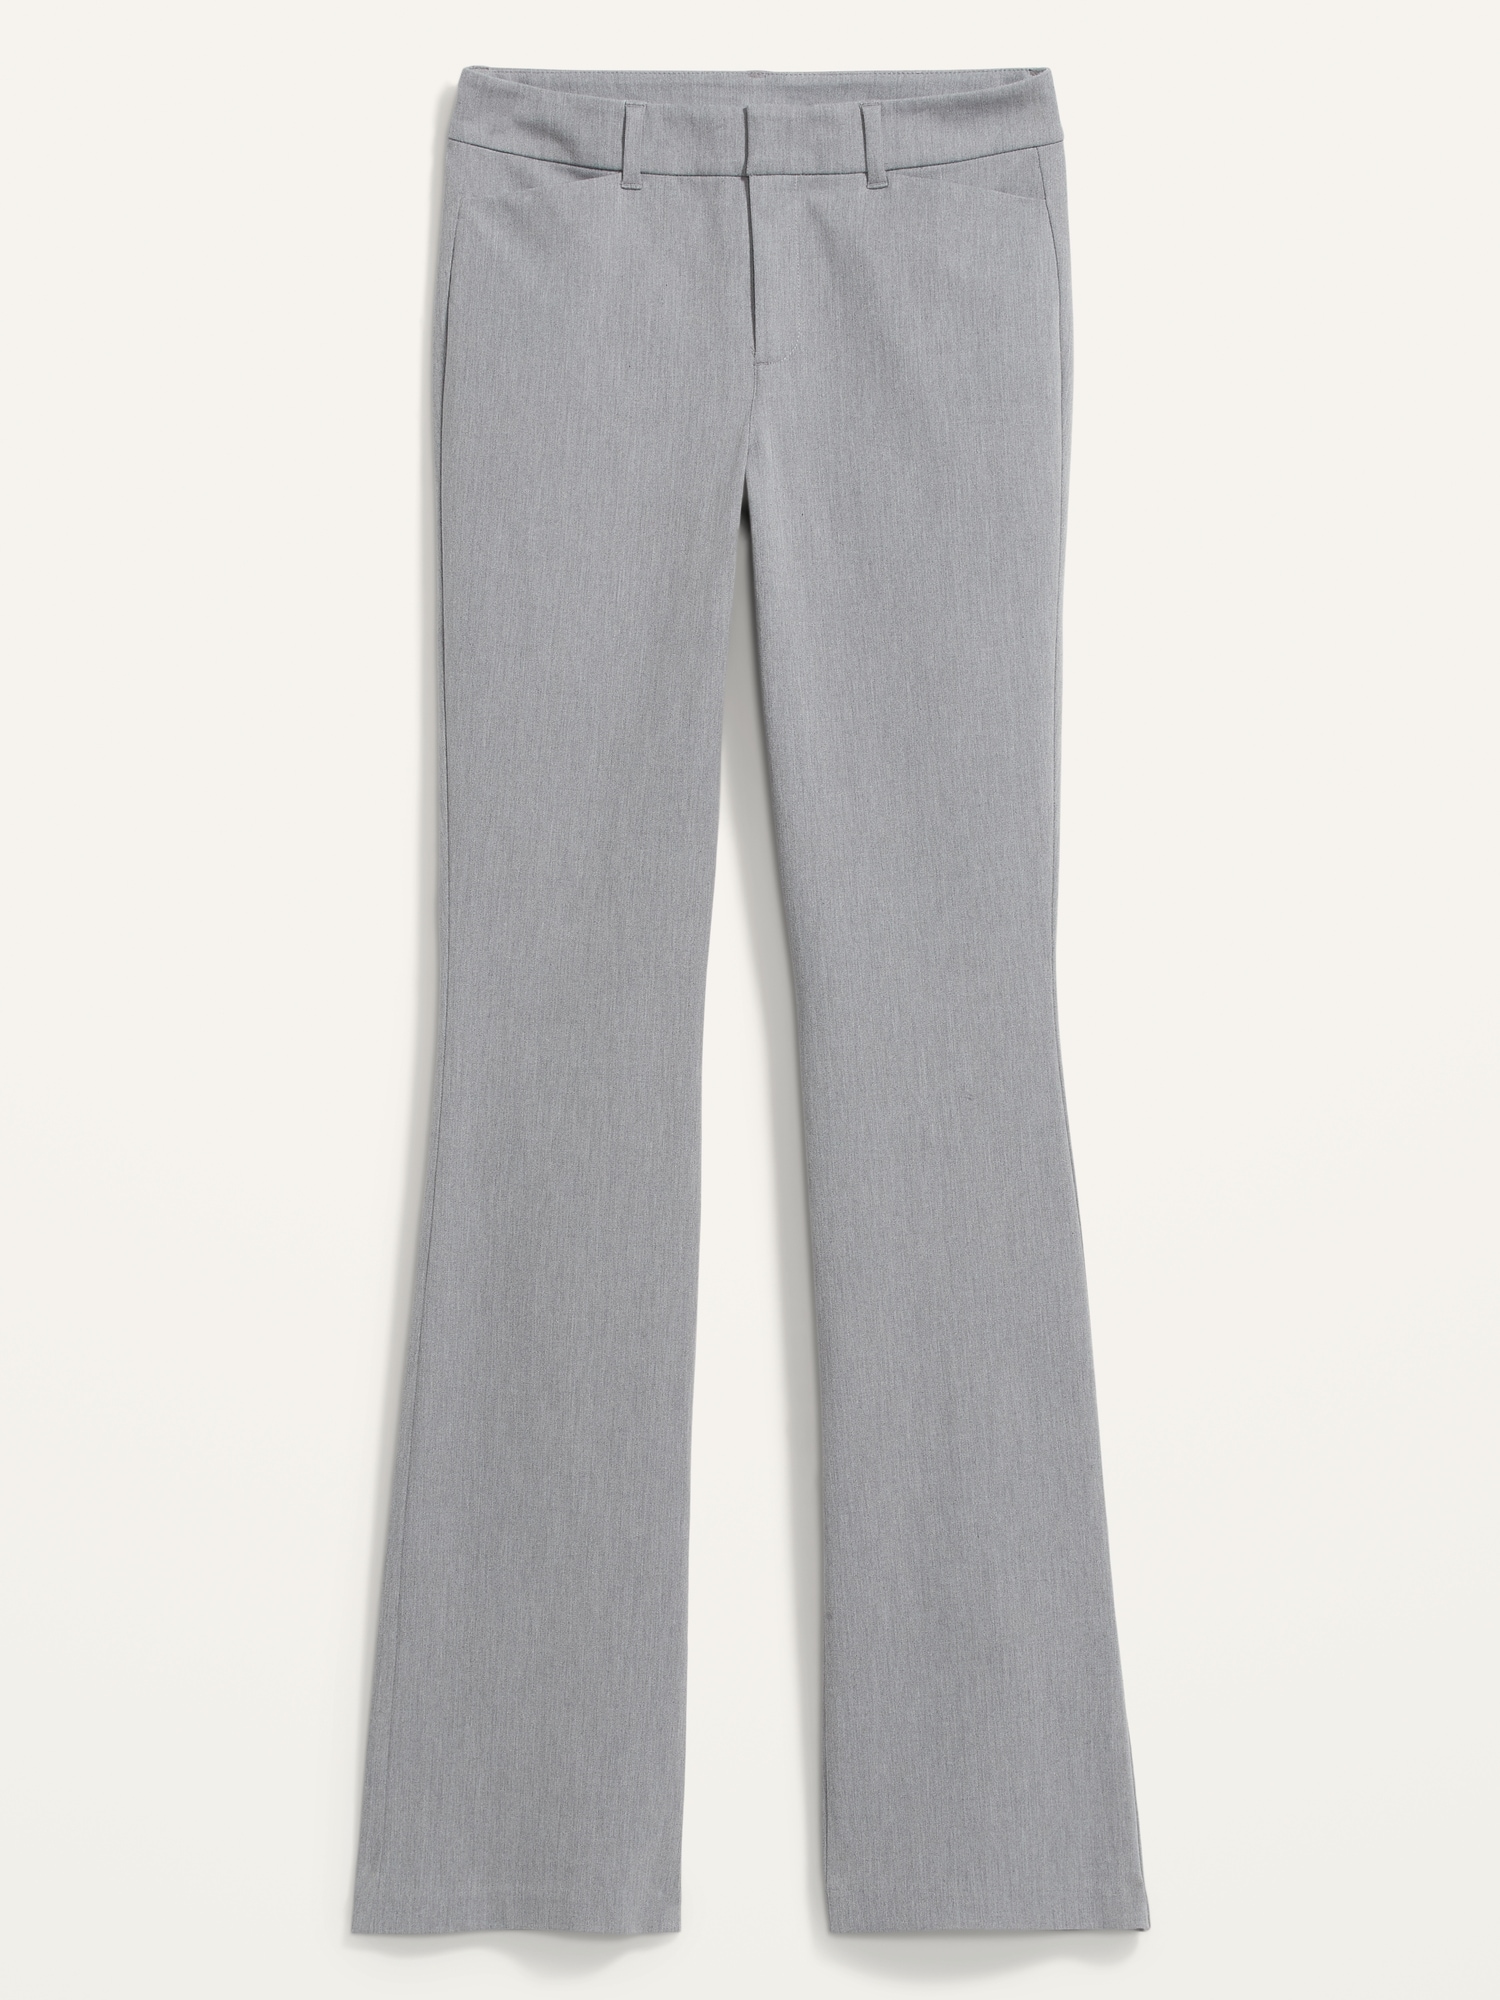 Old Navy High-Waisted Heathered Pixie Flare Pants for Women